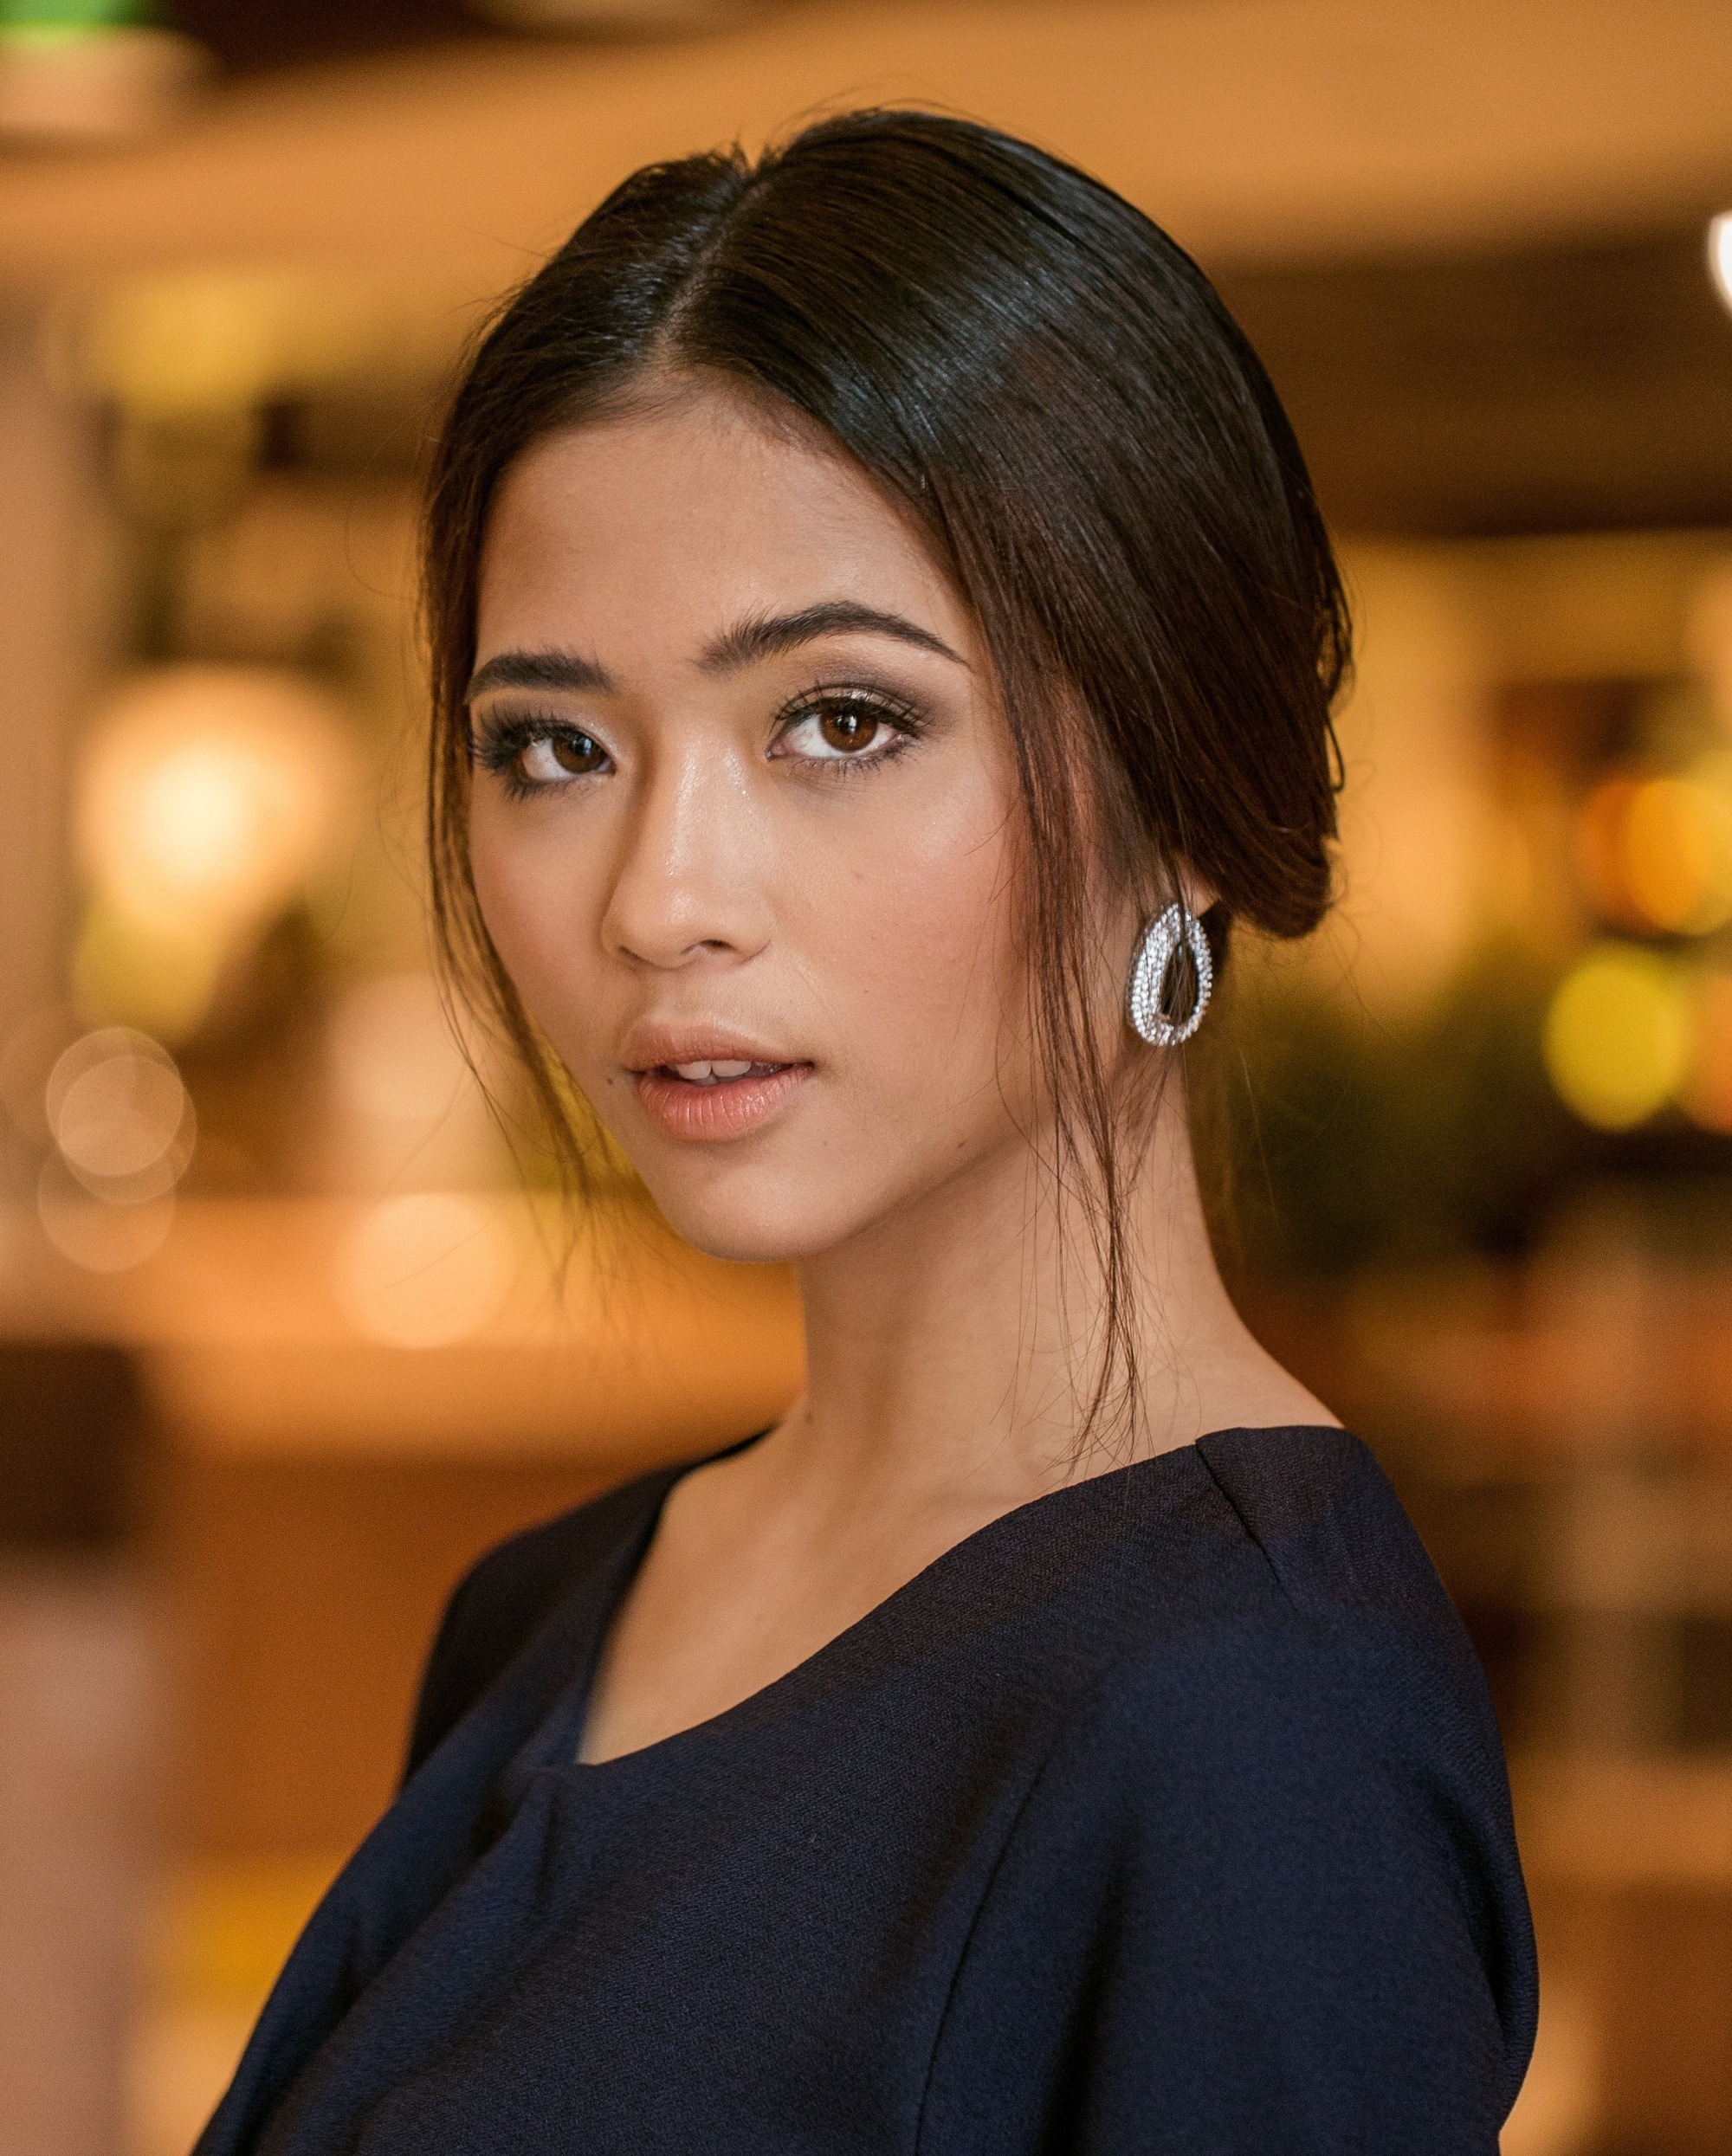 Asian woman with an updo hairstyle wearing a dark blue dress and earrings